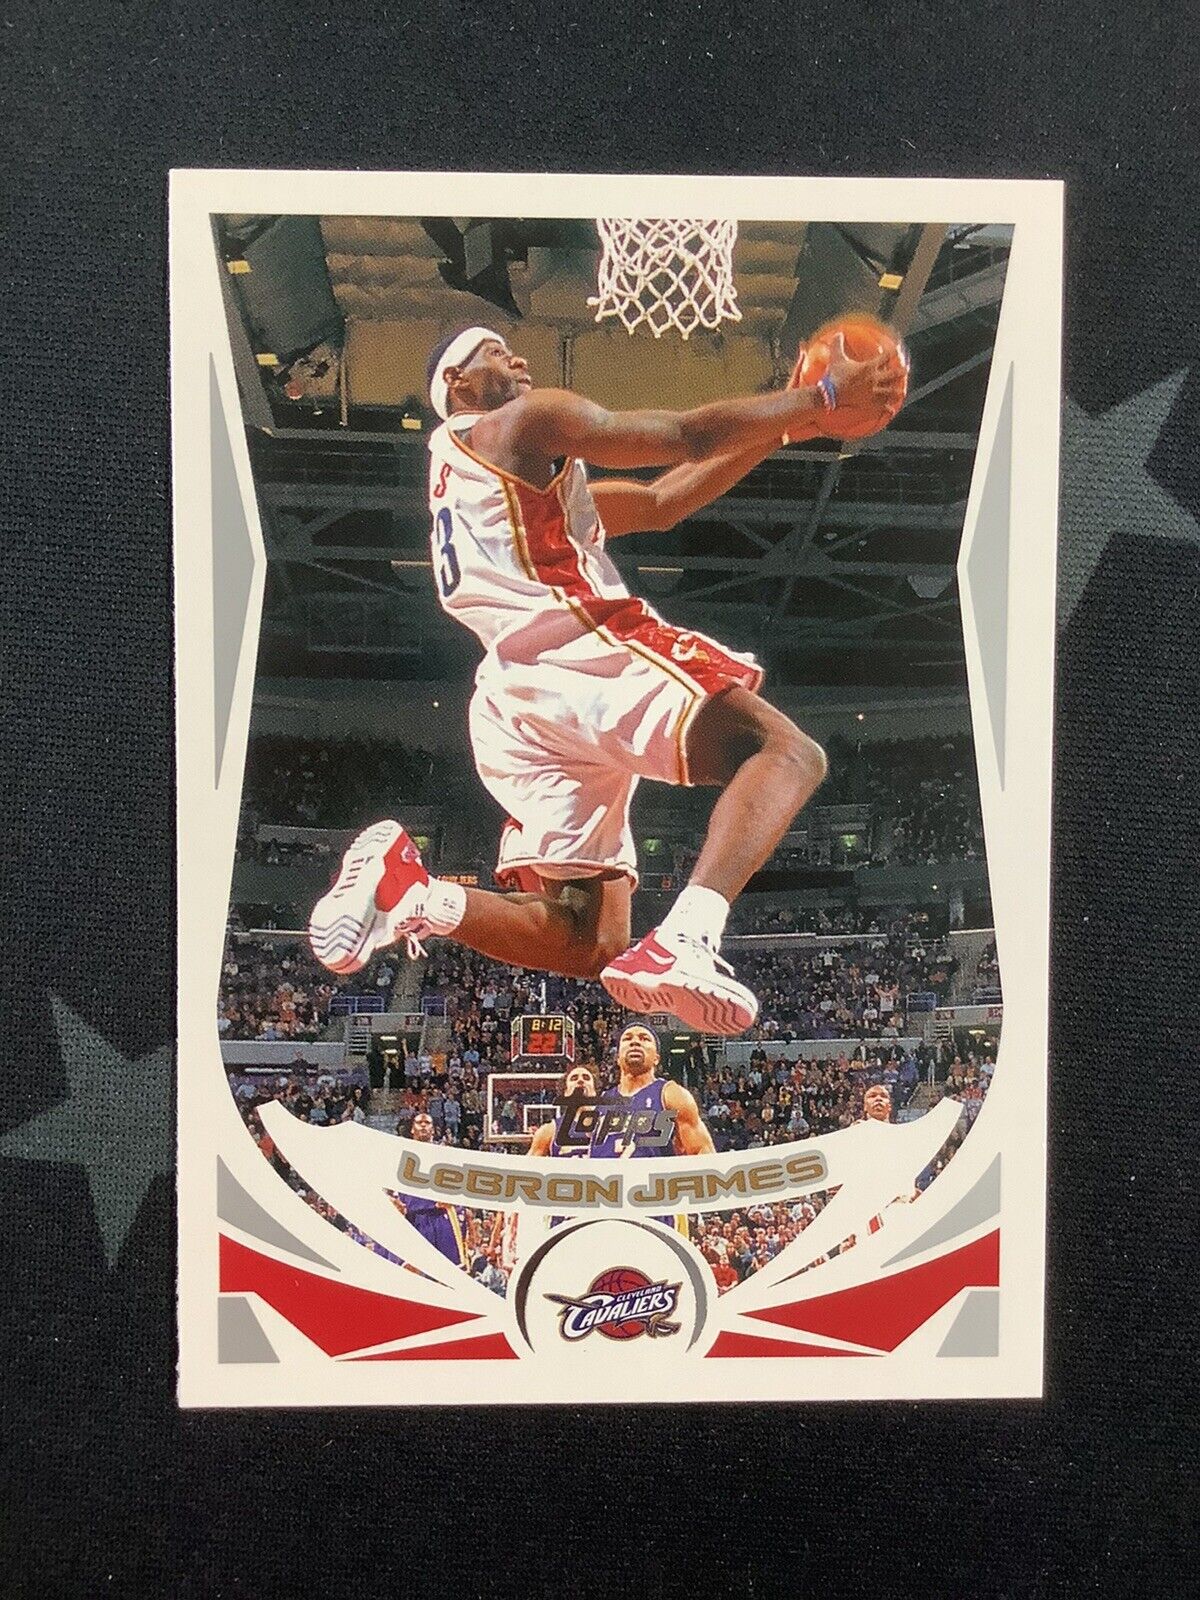 2004 TOPPS BASKETBALL LEBRON JAMES 2ND YEAR CLEVELAND CAVALIERS CARD